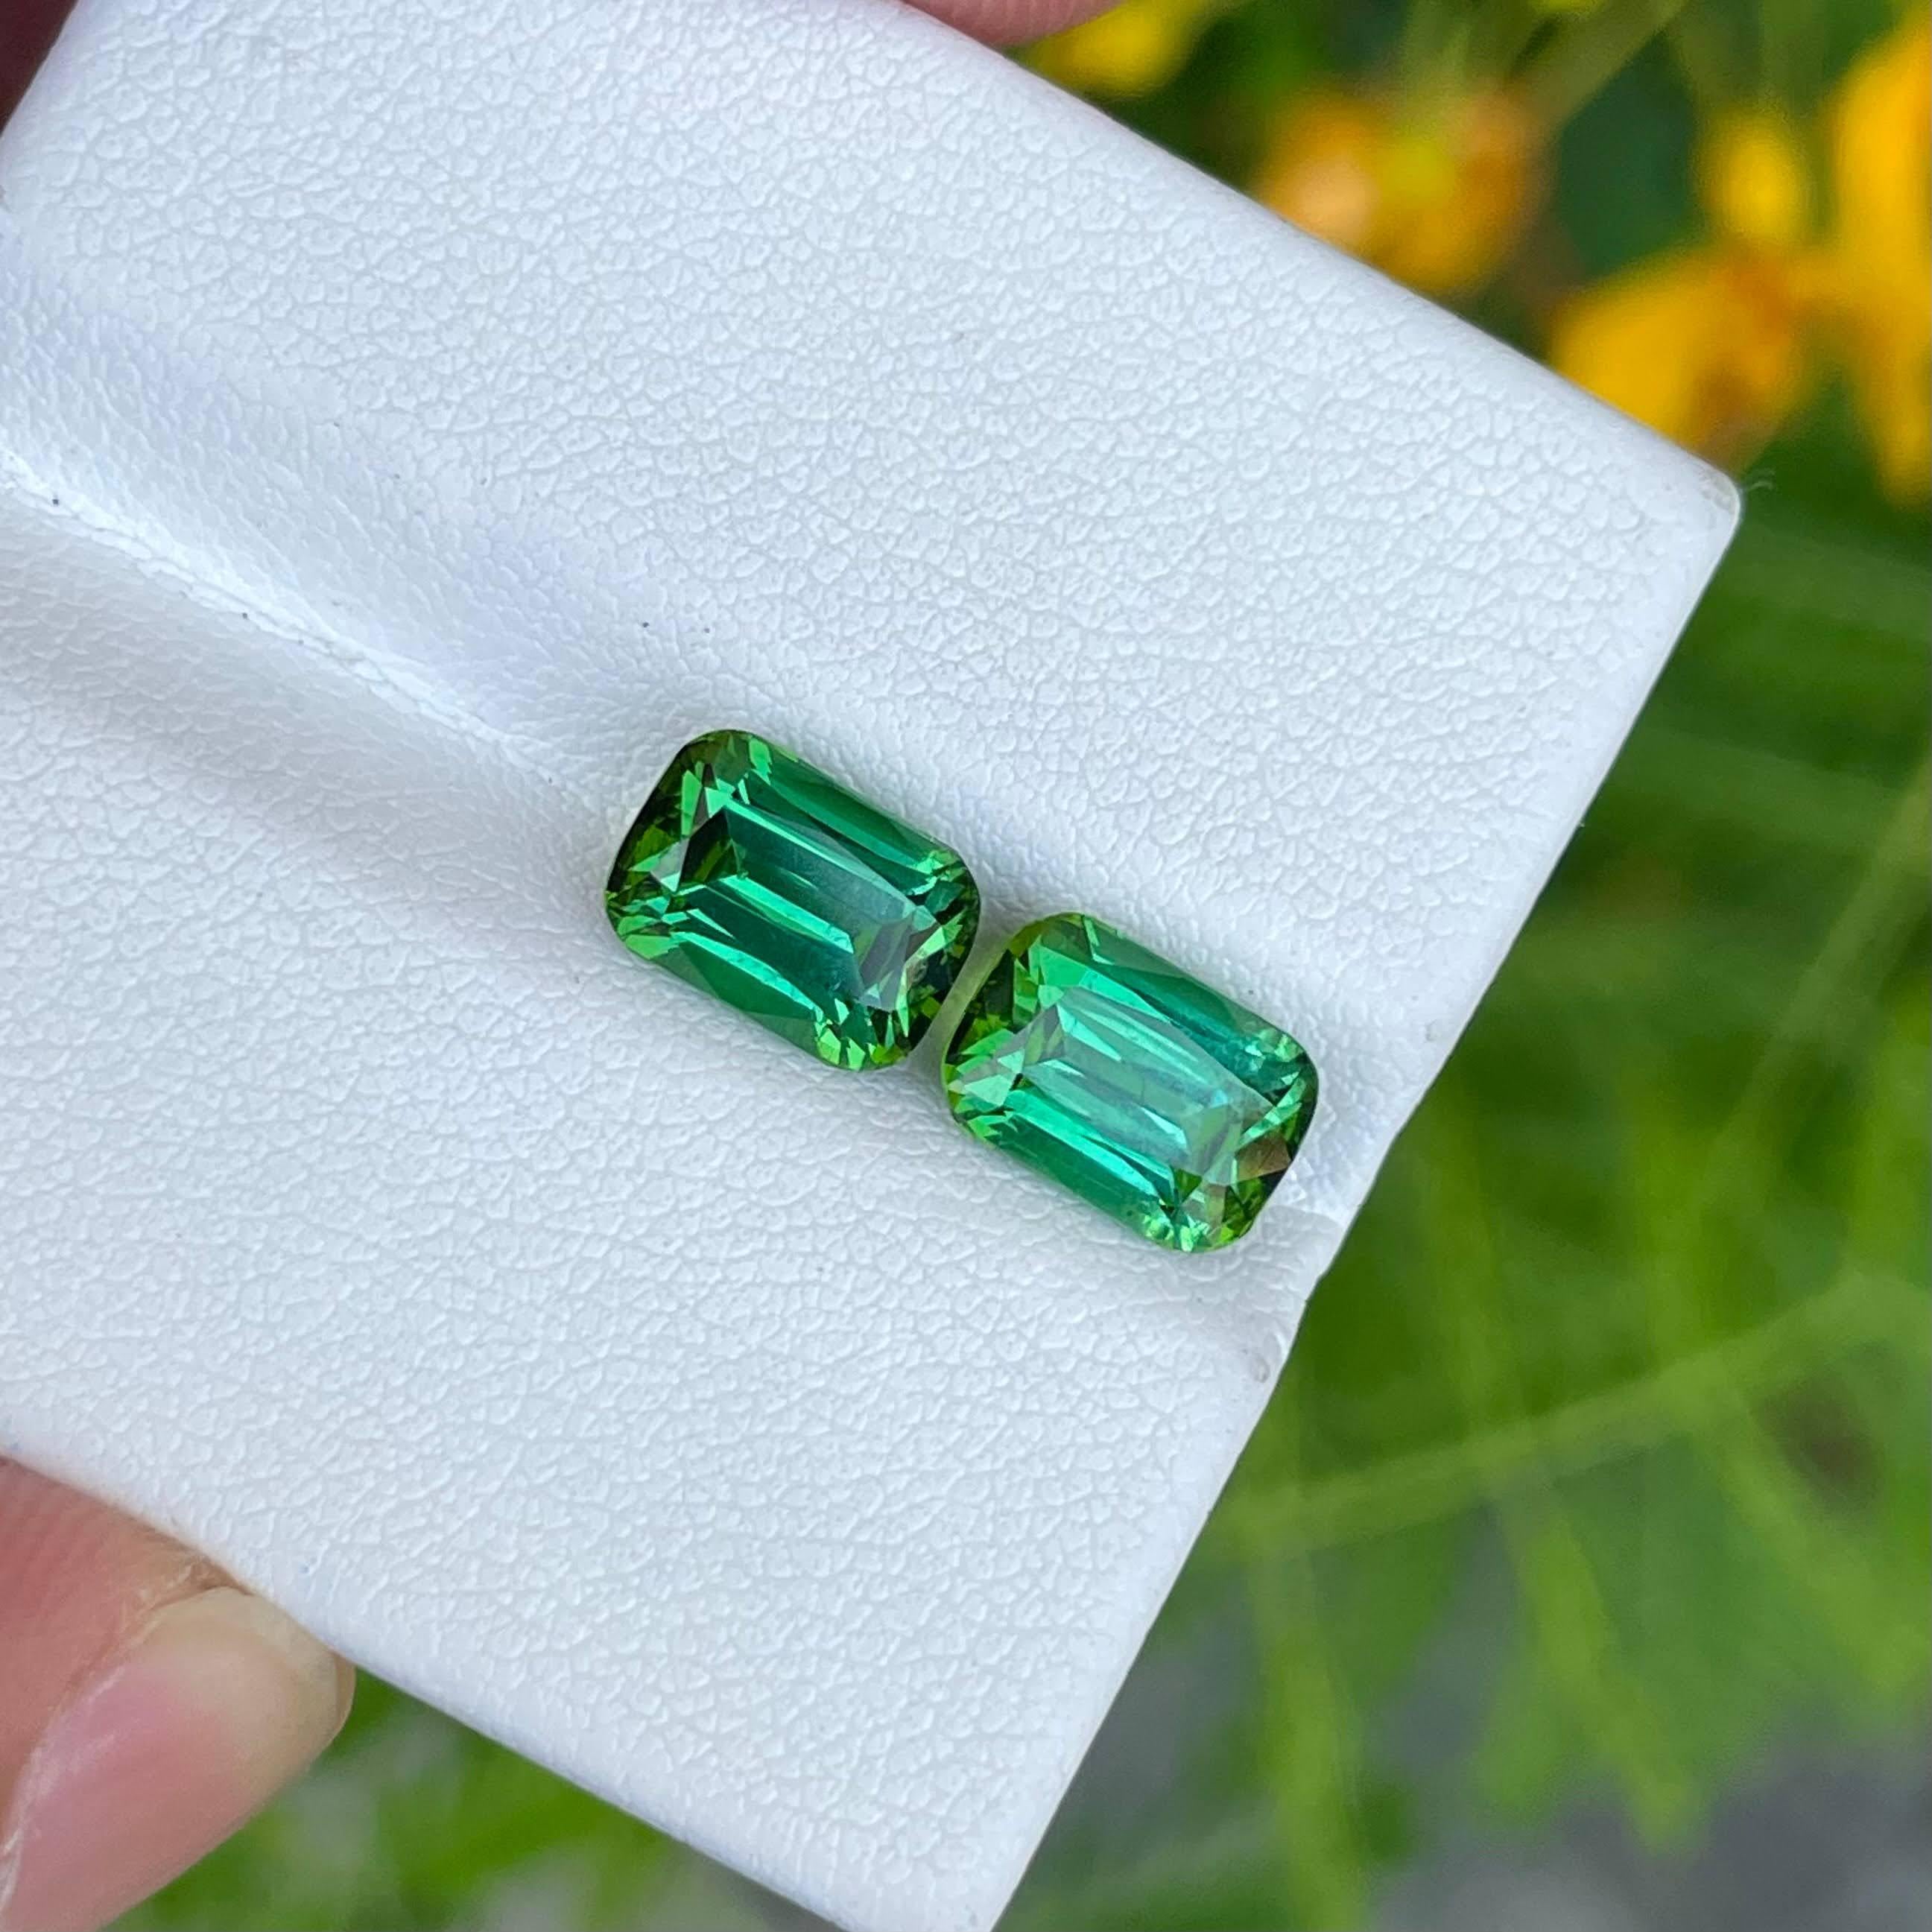 Weight: 4.90 carats
Dimensions : 8.8x6.1x5.5 mm
Treatment none 
Origin Afghanistan 
Clarity VVS
Shape cushion
Cut fancy cushion 




This exquisite pair of Bluish Green tourmaline gemstones, boasting a total weight of 4.90 carats, emanates a